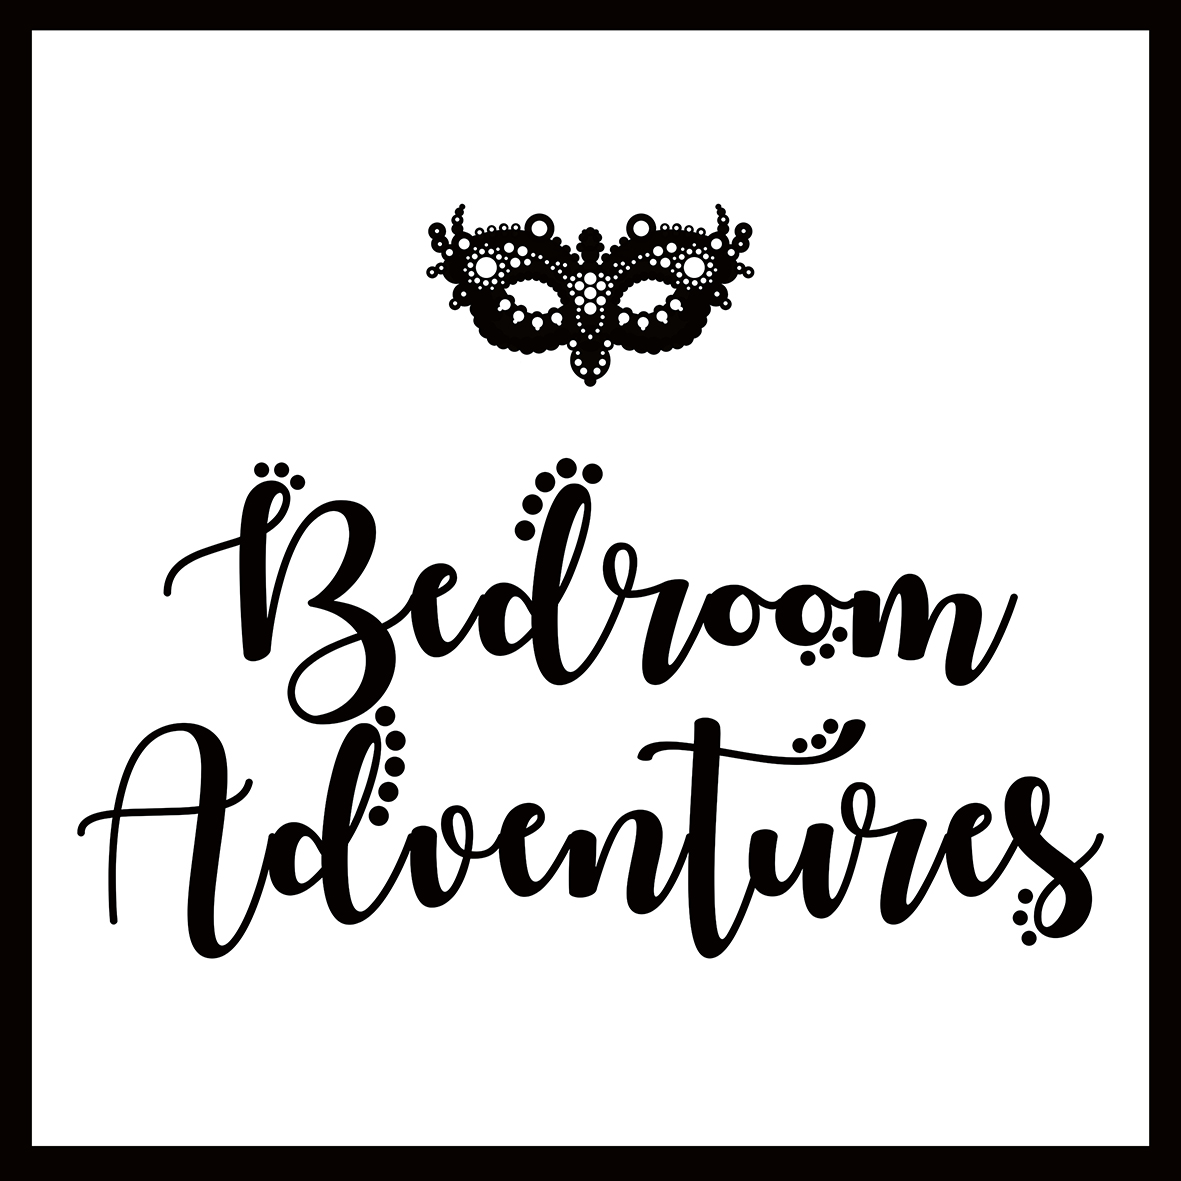 Win A Decor Heart Wedge From Bedroom Adventures